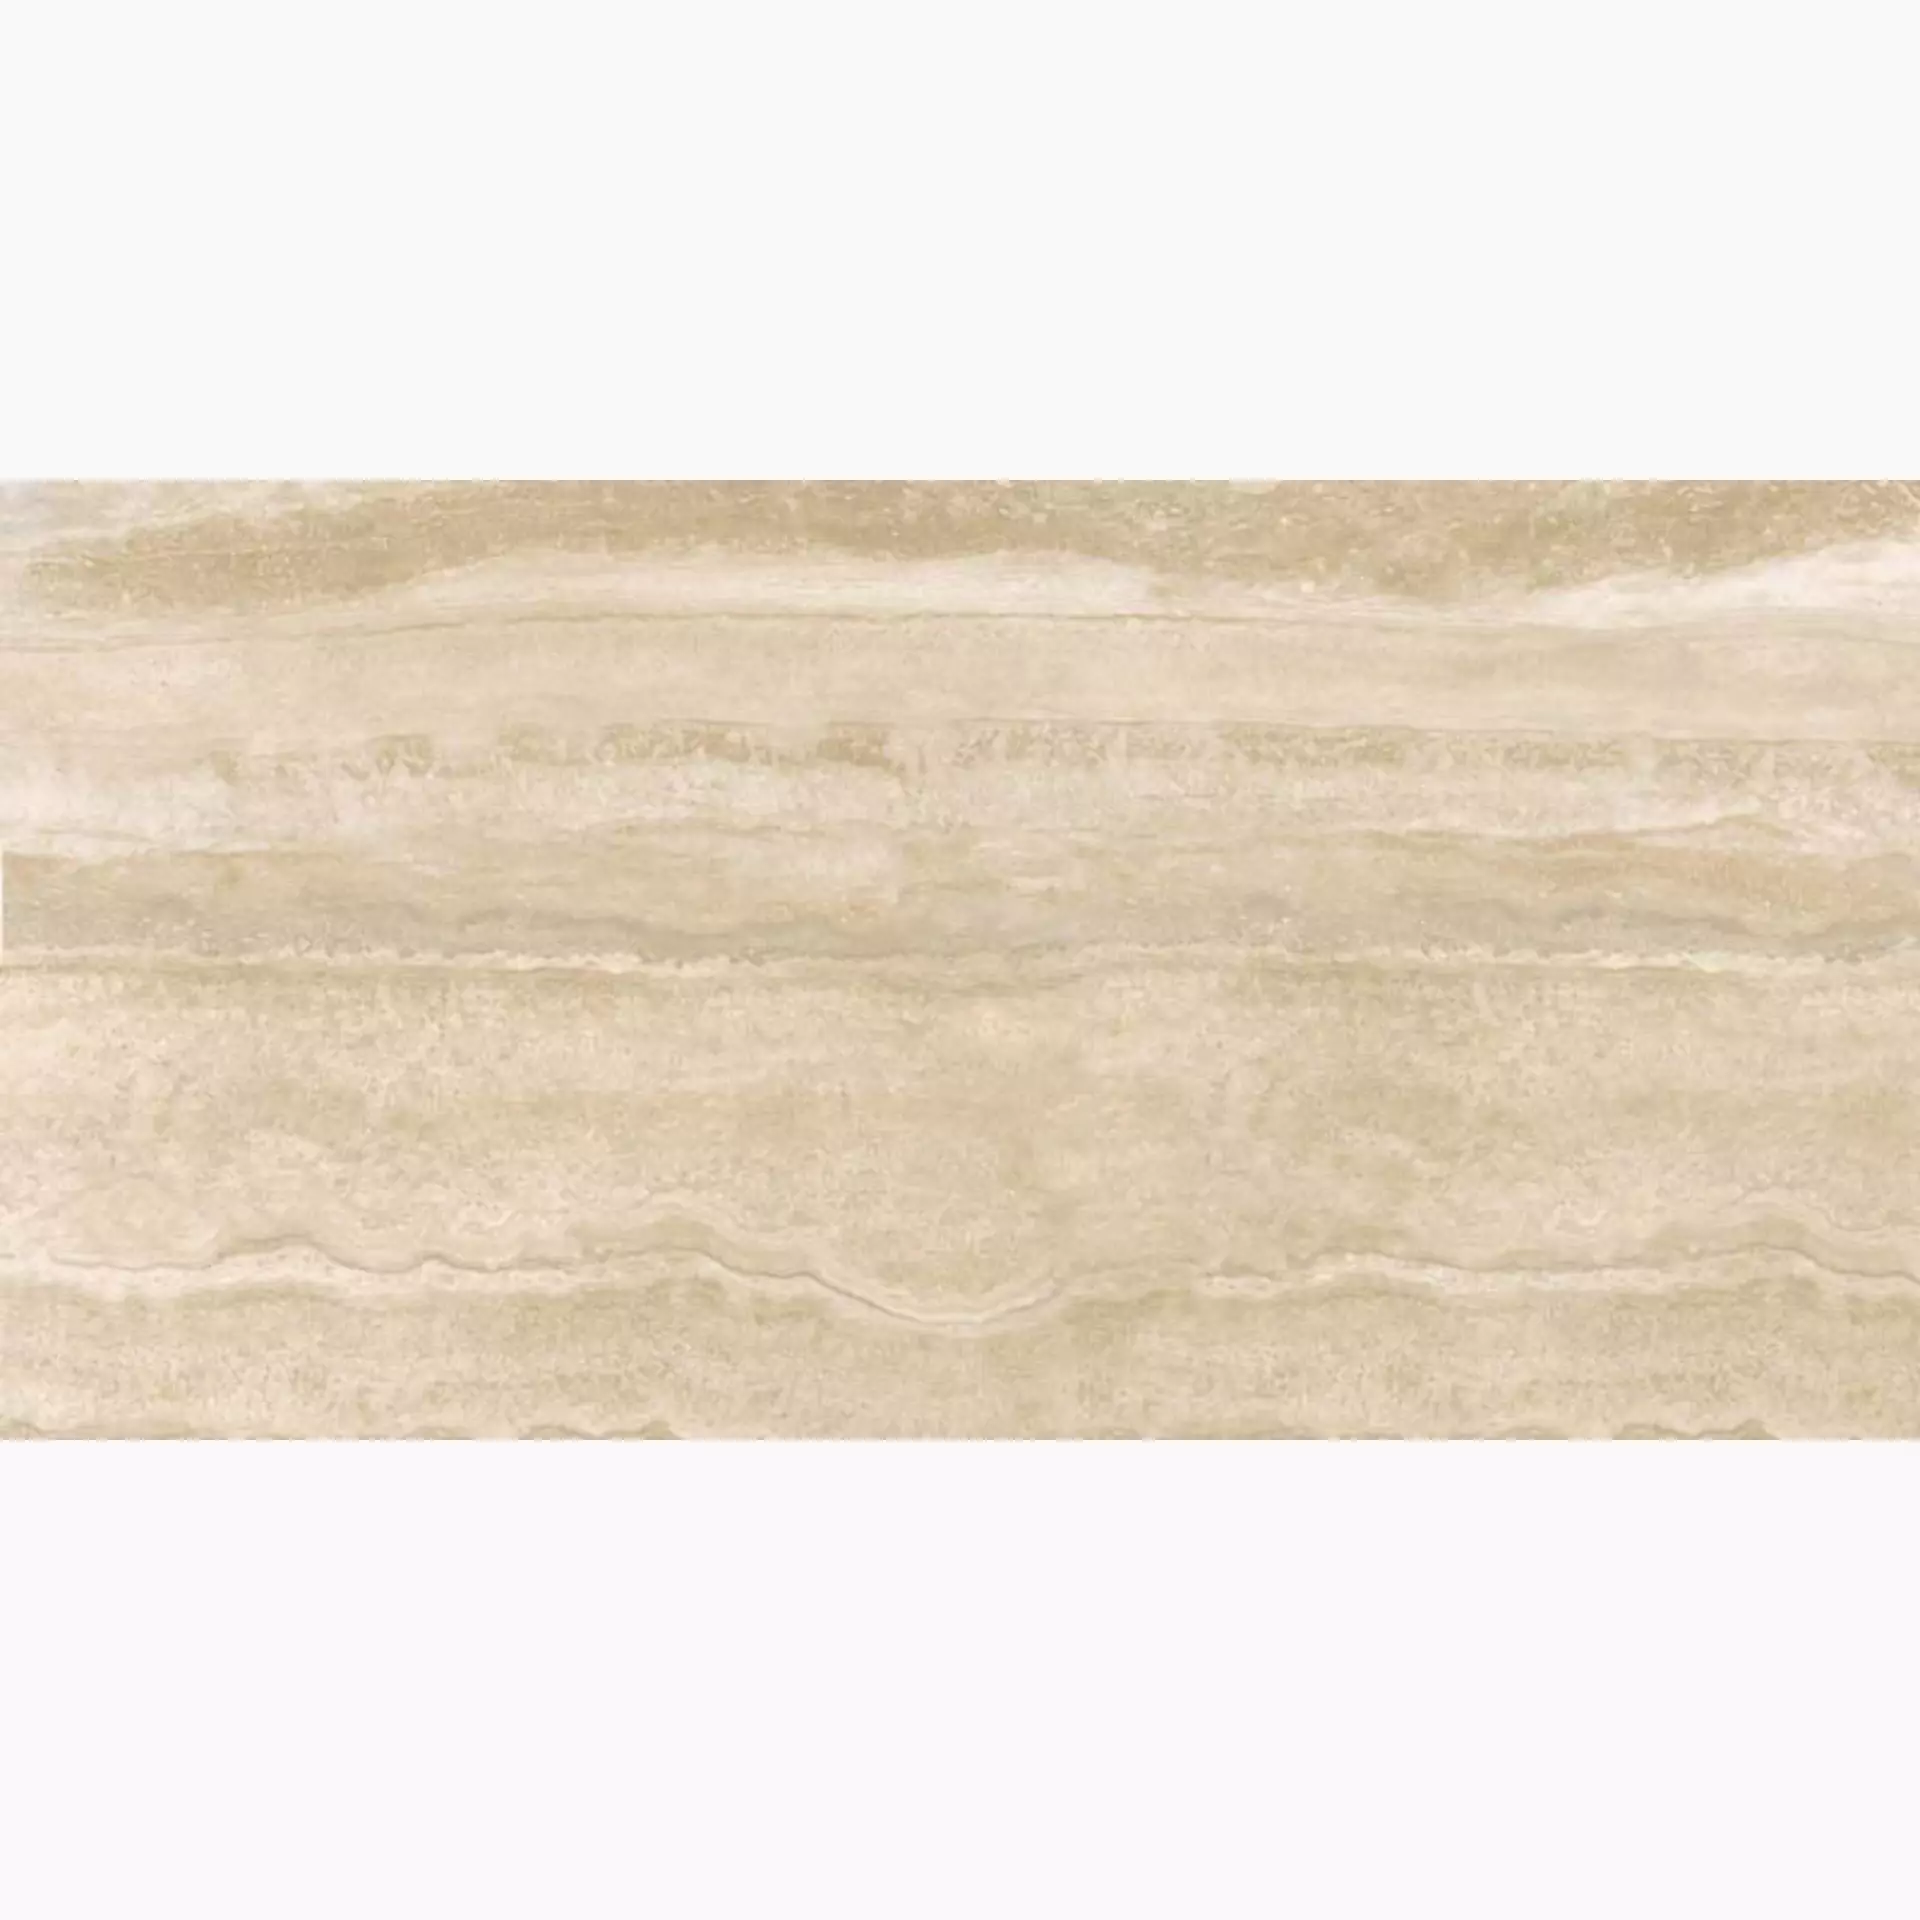 Sant Agostino Via Appia Beige Natural CSAAVCBG12 60x120cm rectified 10mm